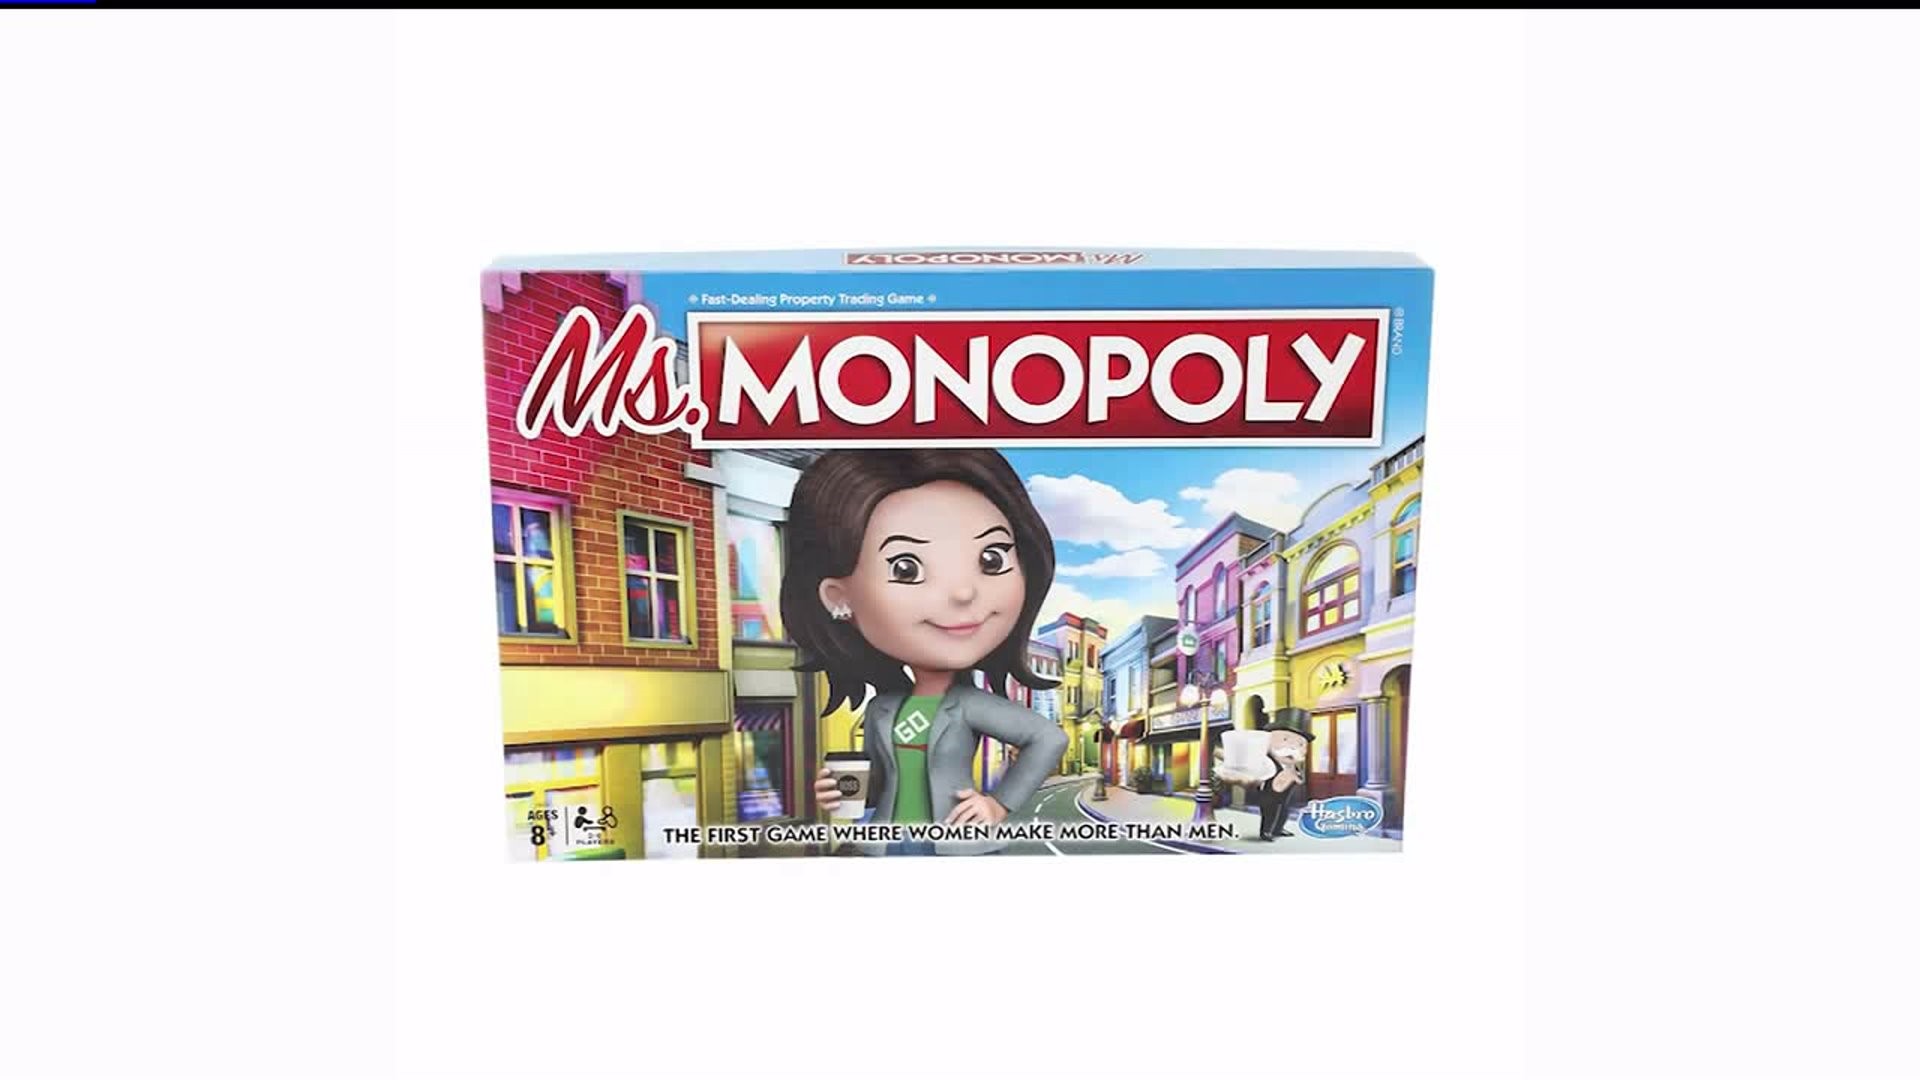 Ms. Monopoly celebrates women, pays them more money during the game